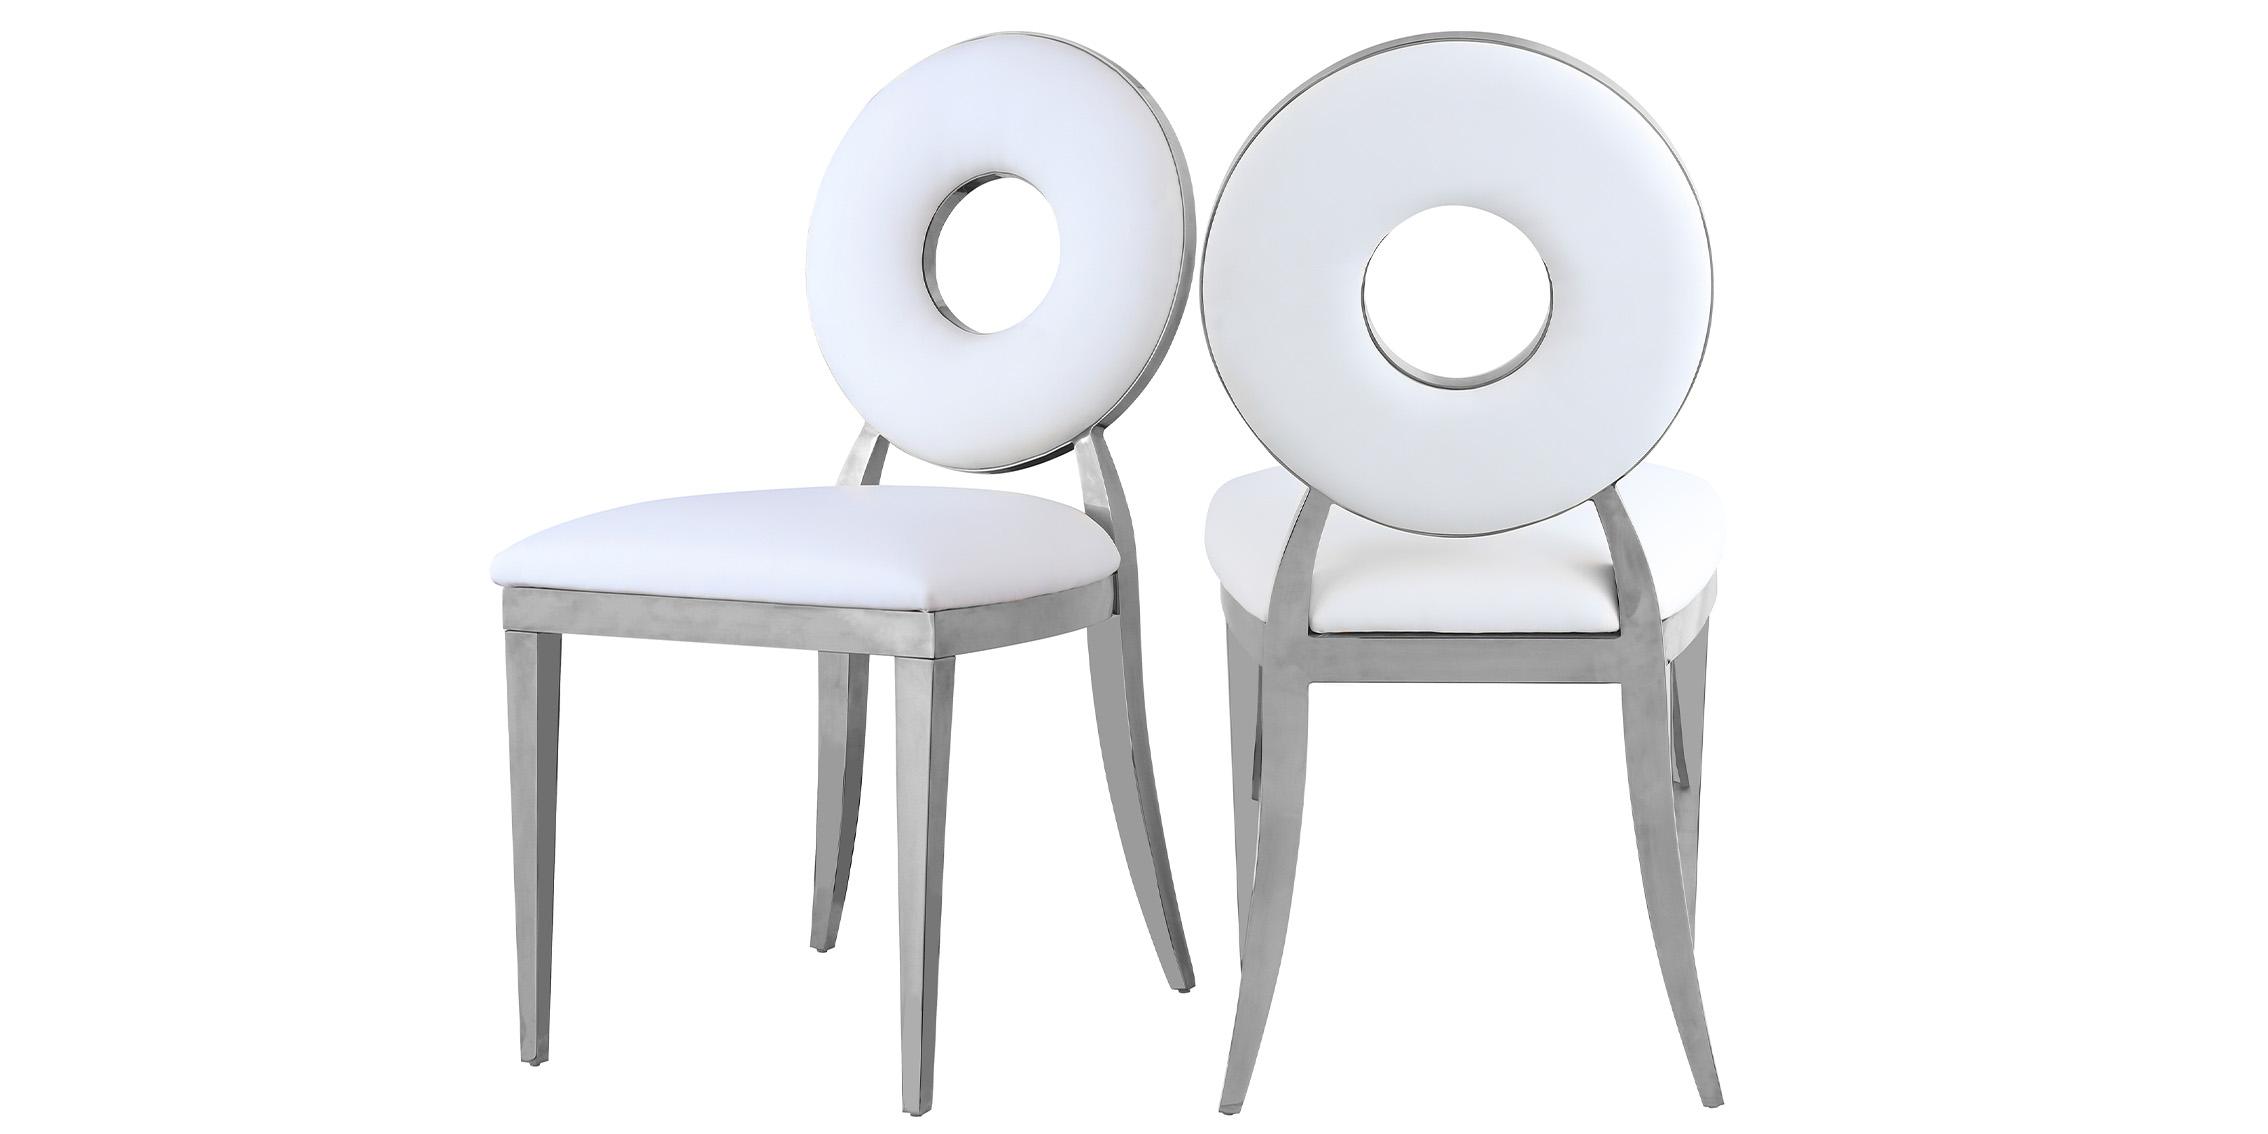 Contemporary Dining Chair Set CAROUSEL 859White-C 859White-C in Chrome, White Faux Leather